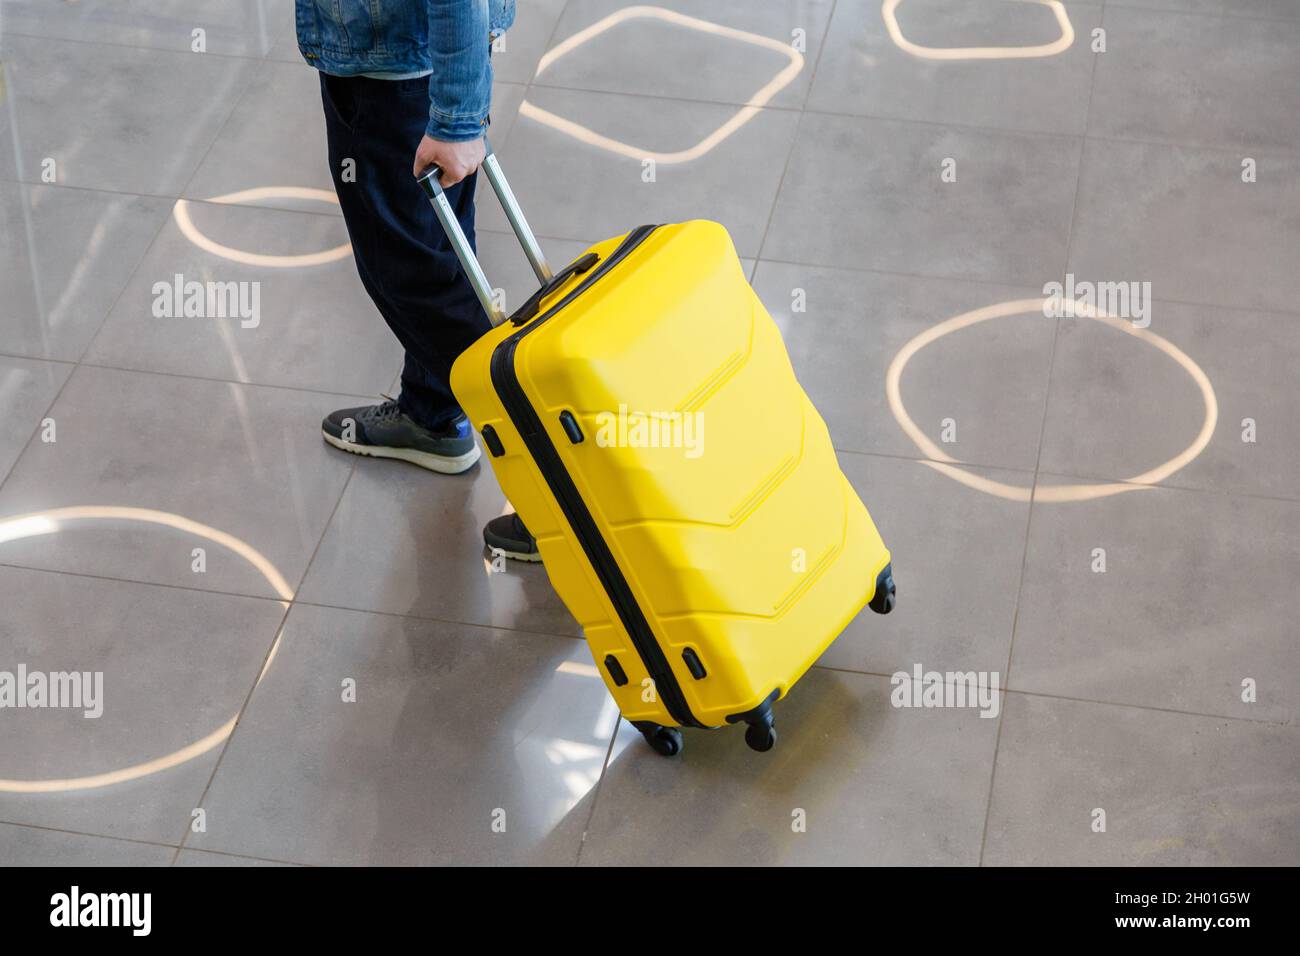 Large yellow suitcase luggage in male hands on the way to the train station. A man walks through the airport and carries a yellow large suitcase Stock Photo